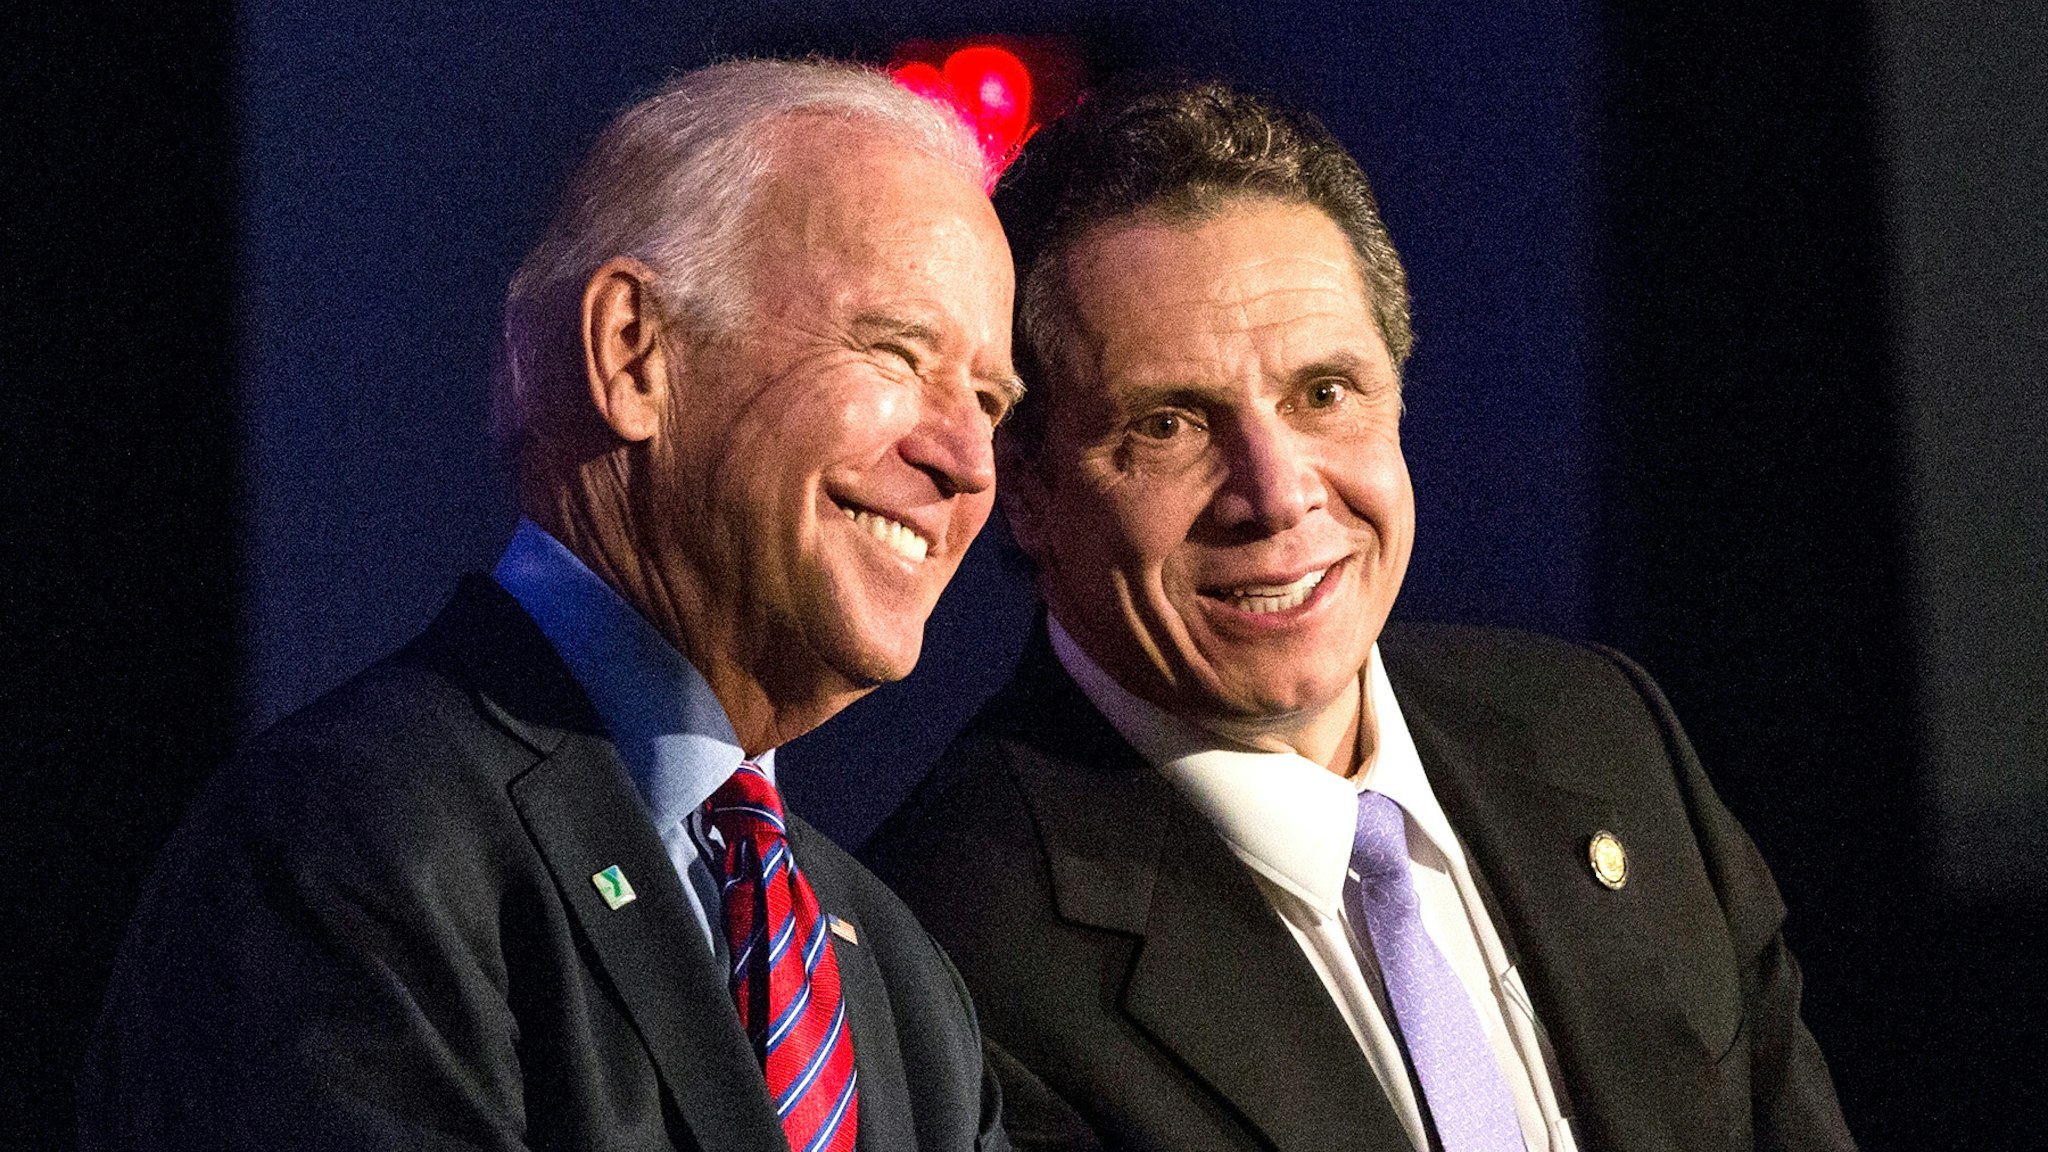 NEW YORK, NY - JANUARY 29: U.S. Vice President Joe Biden (L) and New York Governor Andrew Cuomo attend a rally for paid family leave on January 29, 2016 in New York City. The rally was attended by many union workers and included speakers Vice President Joe Biden, New York Governor Andrew Cuomo, U.S. Representative Carolyn Maloney (D-NY 12th District) and former model Christy Turlington.